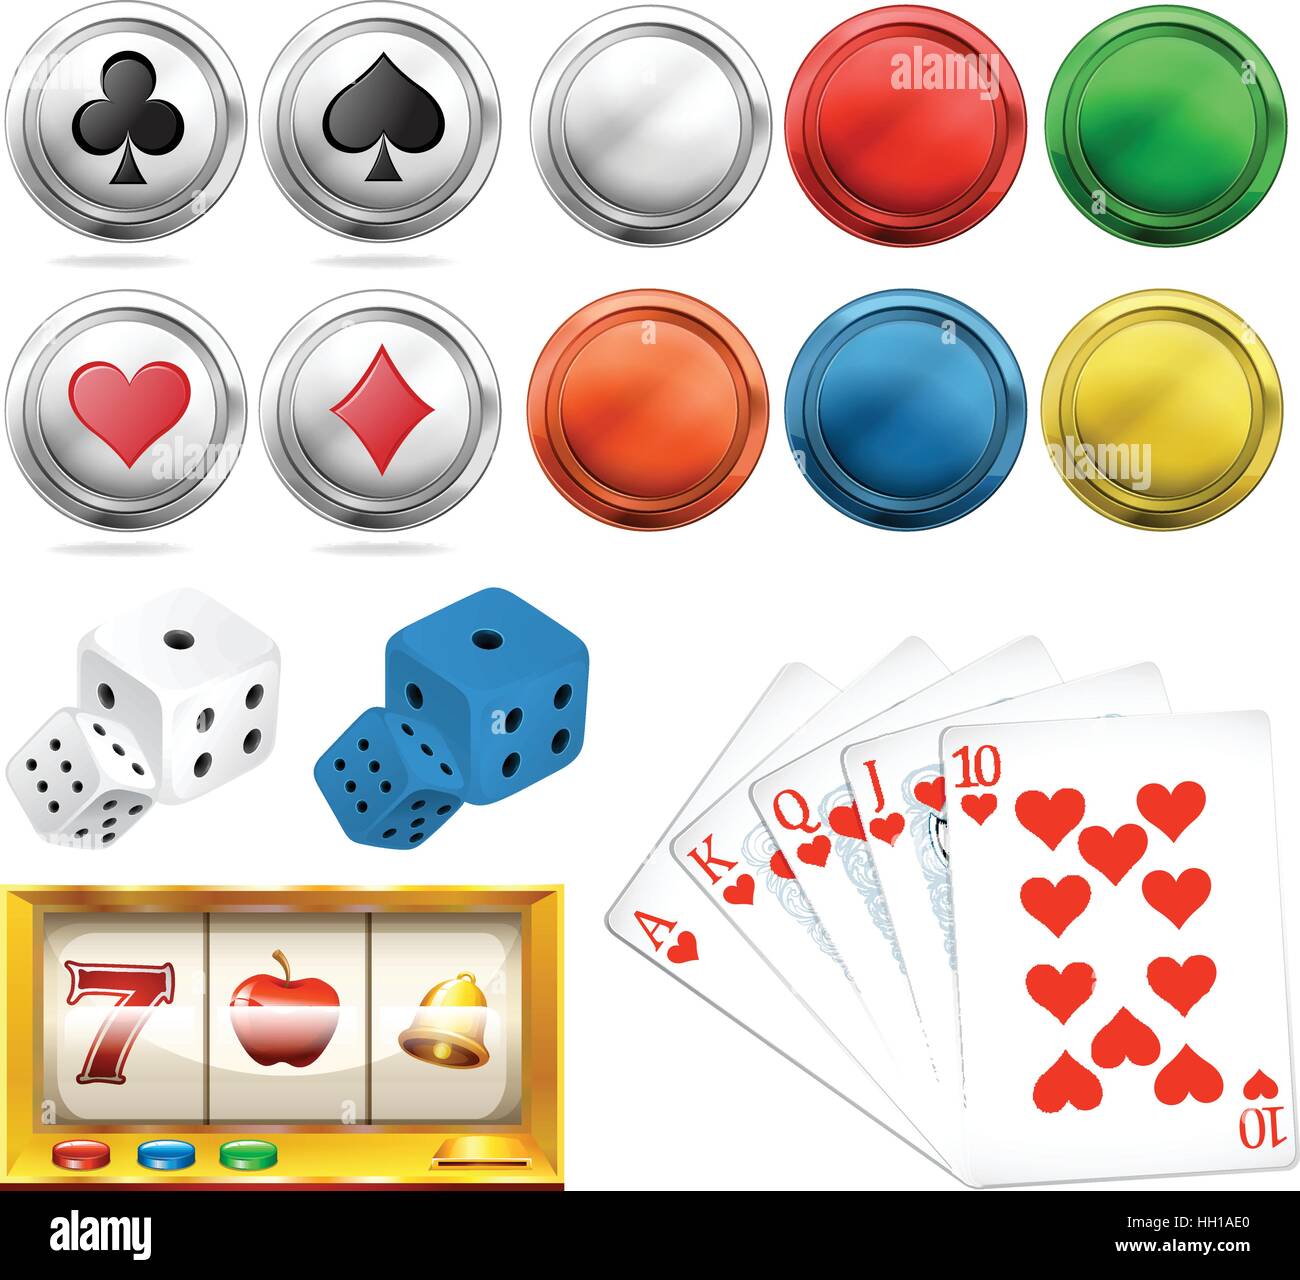 Casino set with tokens and cards illustration Stock Vector